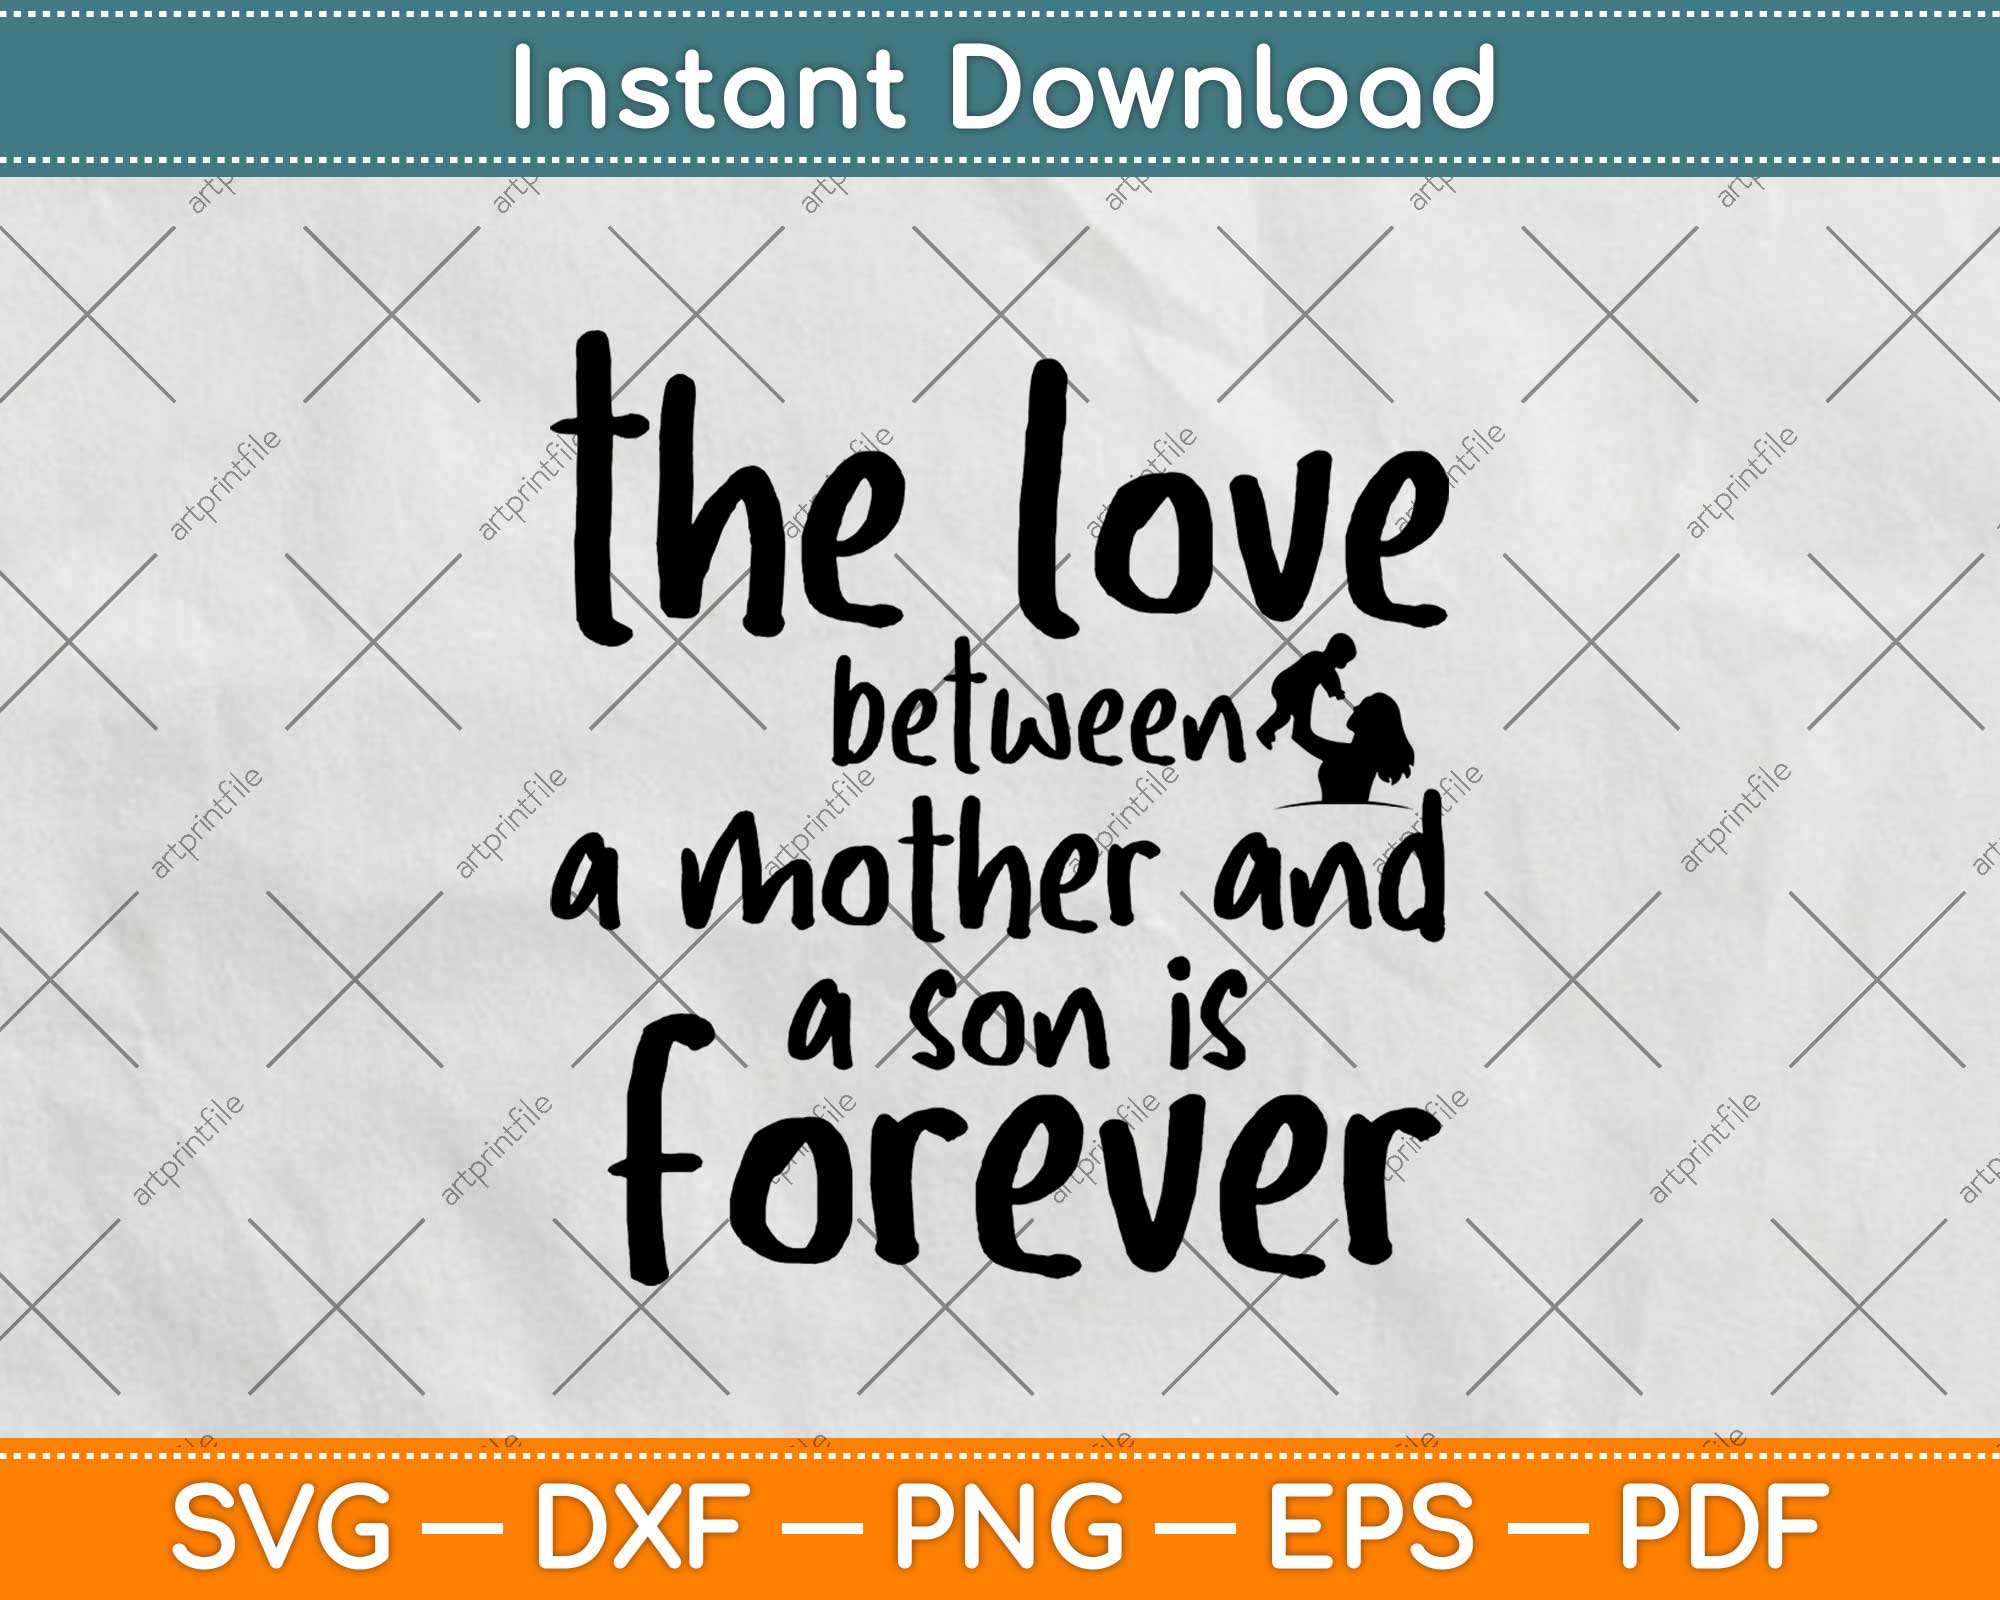 Download The Love Between A Mother And A Son Is Forever Svg Png Dxf Files Artprintfile